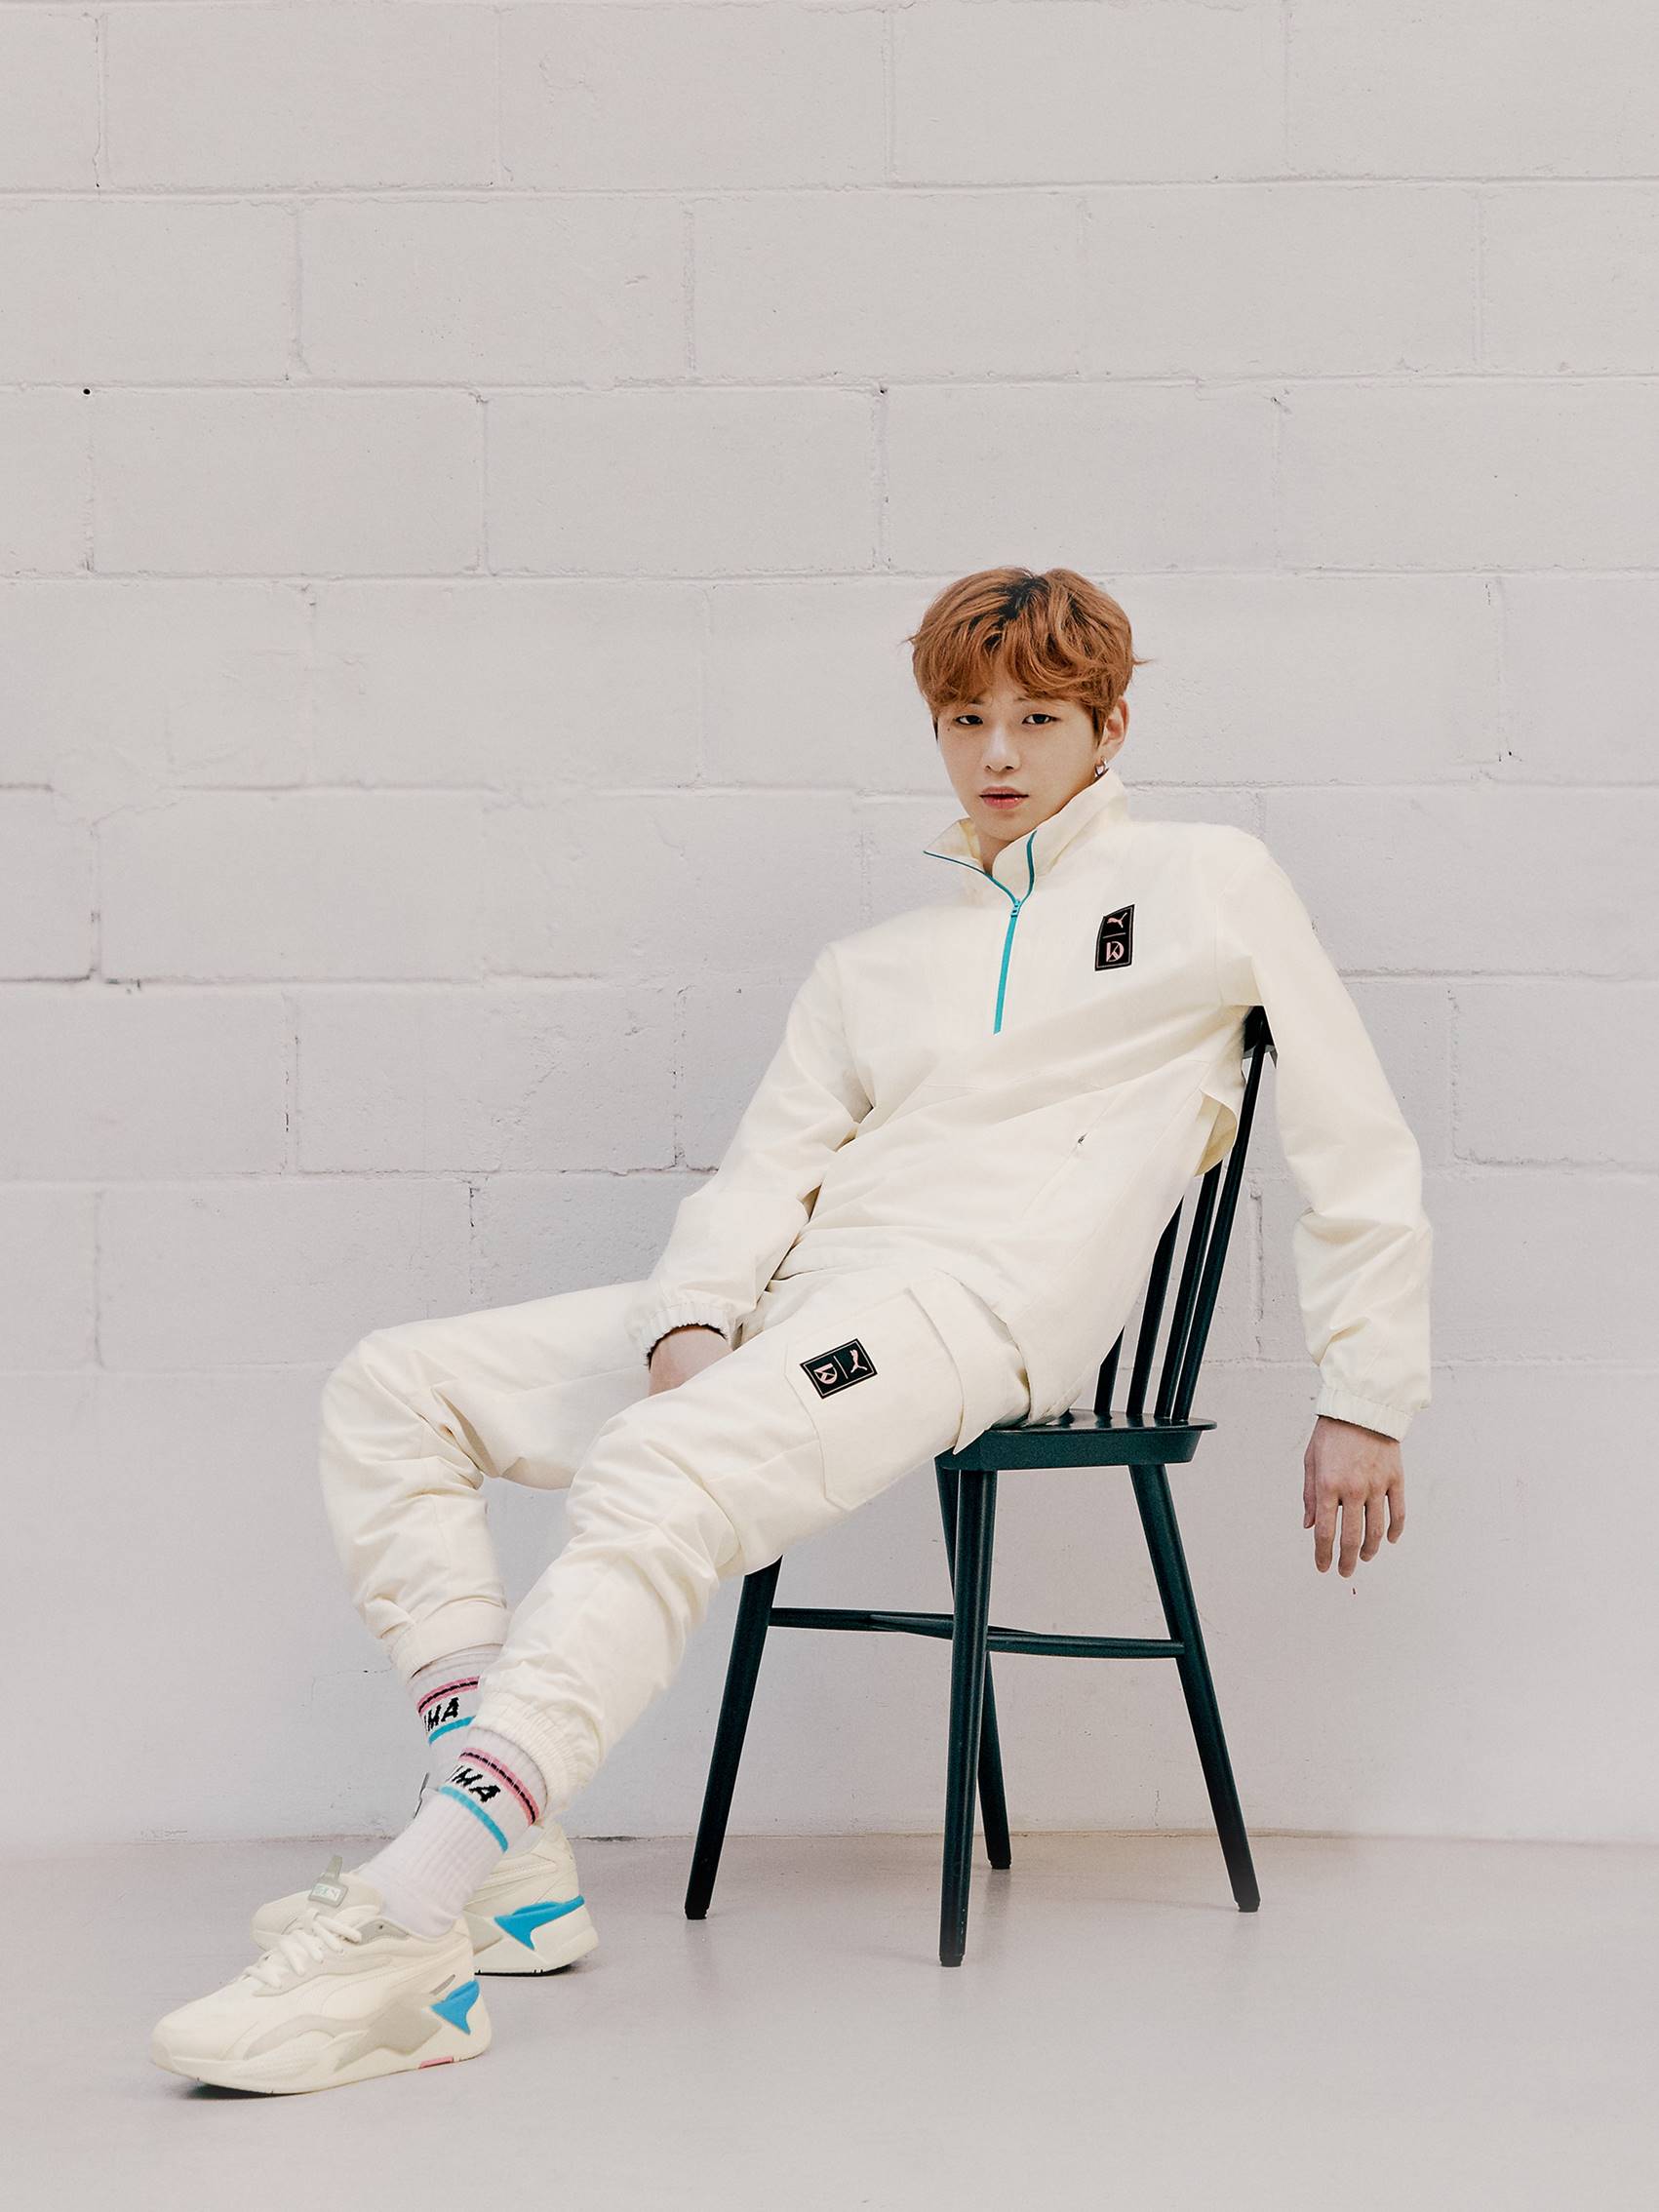 Kang Daniel and global sports brand Puma (PUMA) will showcase Collaboration products.Puma will sell its first collaboration shoe RS-XCube with Kang Daniel from 17th, and can be purchased at Puma Online Store and All States stores.RS-XCube is one of Pumas flagship shoe line, the RS (Running System) series, featuring an excellent grip. It is wearable for both sexes.The overall ivory color has a blue and pink color block at the point, creating a cheerful atmosphere.The RS-XCube campaign message is also impressive: You and I have a special relationship as a key message, meaning a sticky and special bond between Kang Daniel and the fan.We have a special event. Puma offers Fan signing event entry and undisclosed photo card.It also runs the Kang Daniel Cube Room for customers visiting the store.The Kang Daniel Cube Room offers private special footage and the worlds only one Goods, as well as virtual video calls with Kang Daniel.The Cube Room is open to anyone during the period at Puma Apgujeong branch (January 17-January 29) or Busan Sports Liberation branch (February 1-February 14).When purchasing RS-X Cube products at All States stores, you can get special prizes and limited goods through on-site event after bringing the Fan signing event application ticket in the shoe box.In addition, the Fan signing event will be held from January 17 to February 28 for the purchaser of the product.